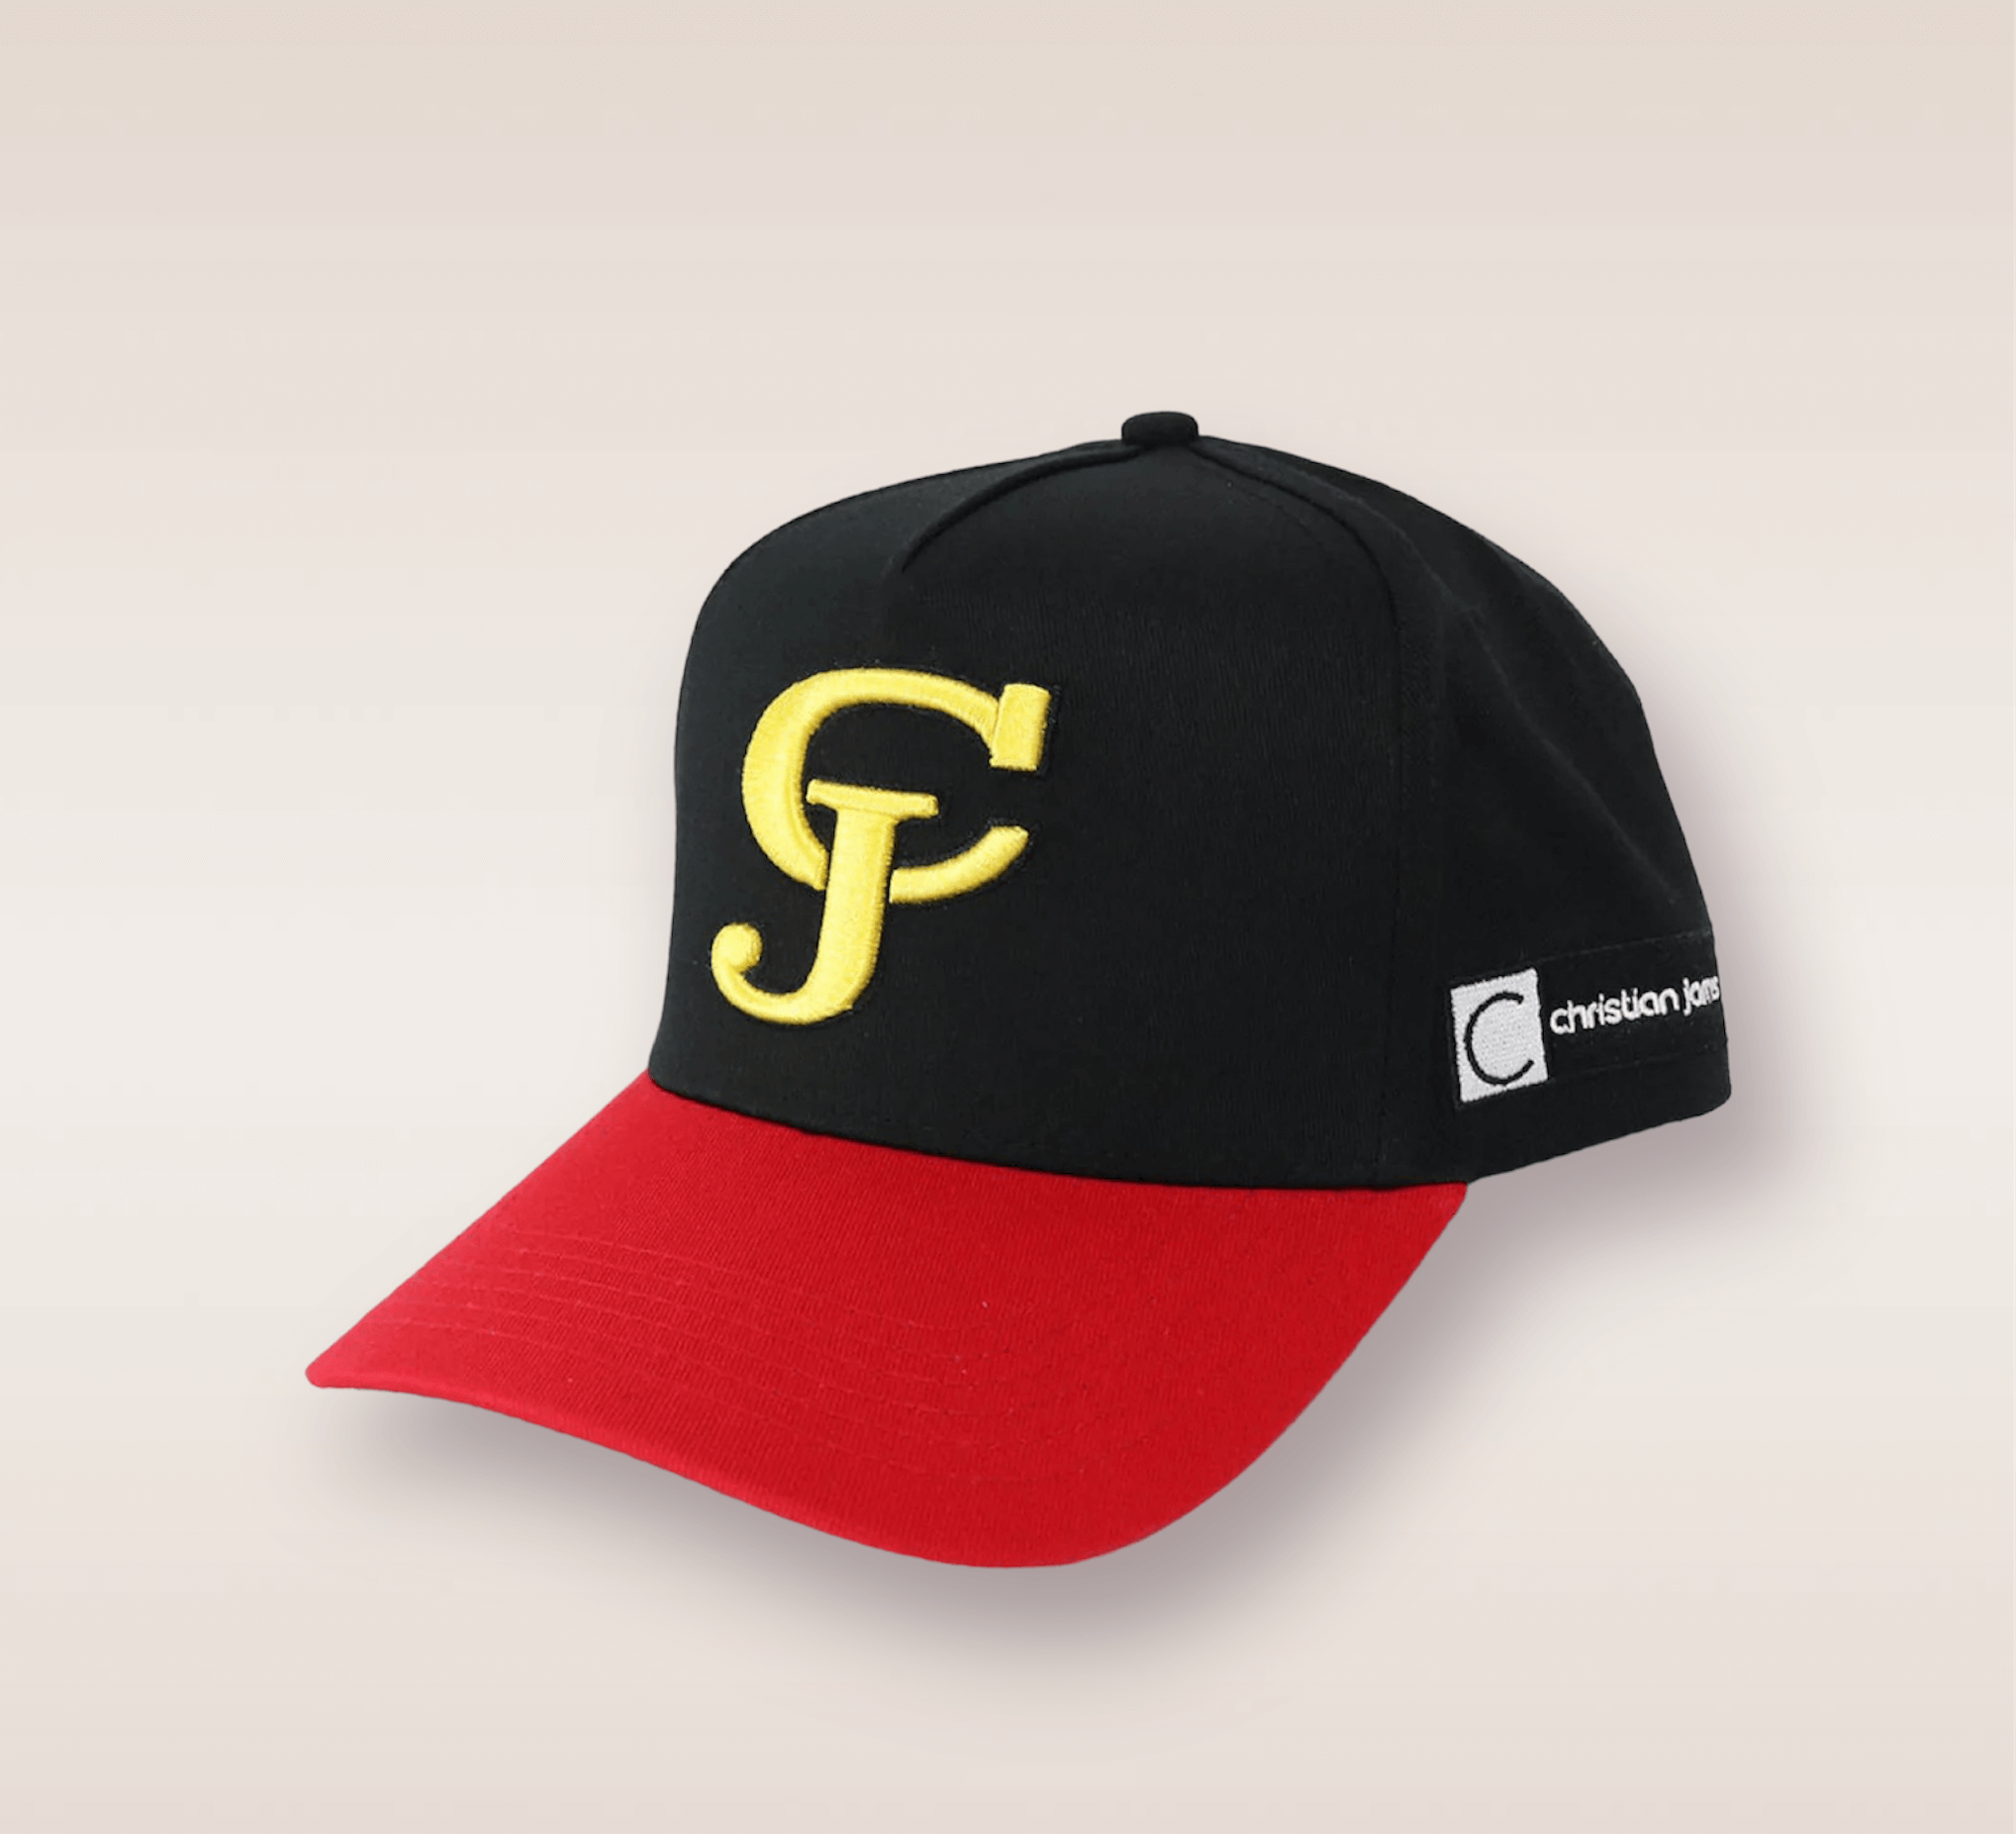 In this up-close shot, we are introduced to the Black and Red CJ Snapback. The hat features a Black cap and a red brim. Embroidered in yellow lettering is the brand’s acronym 